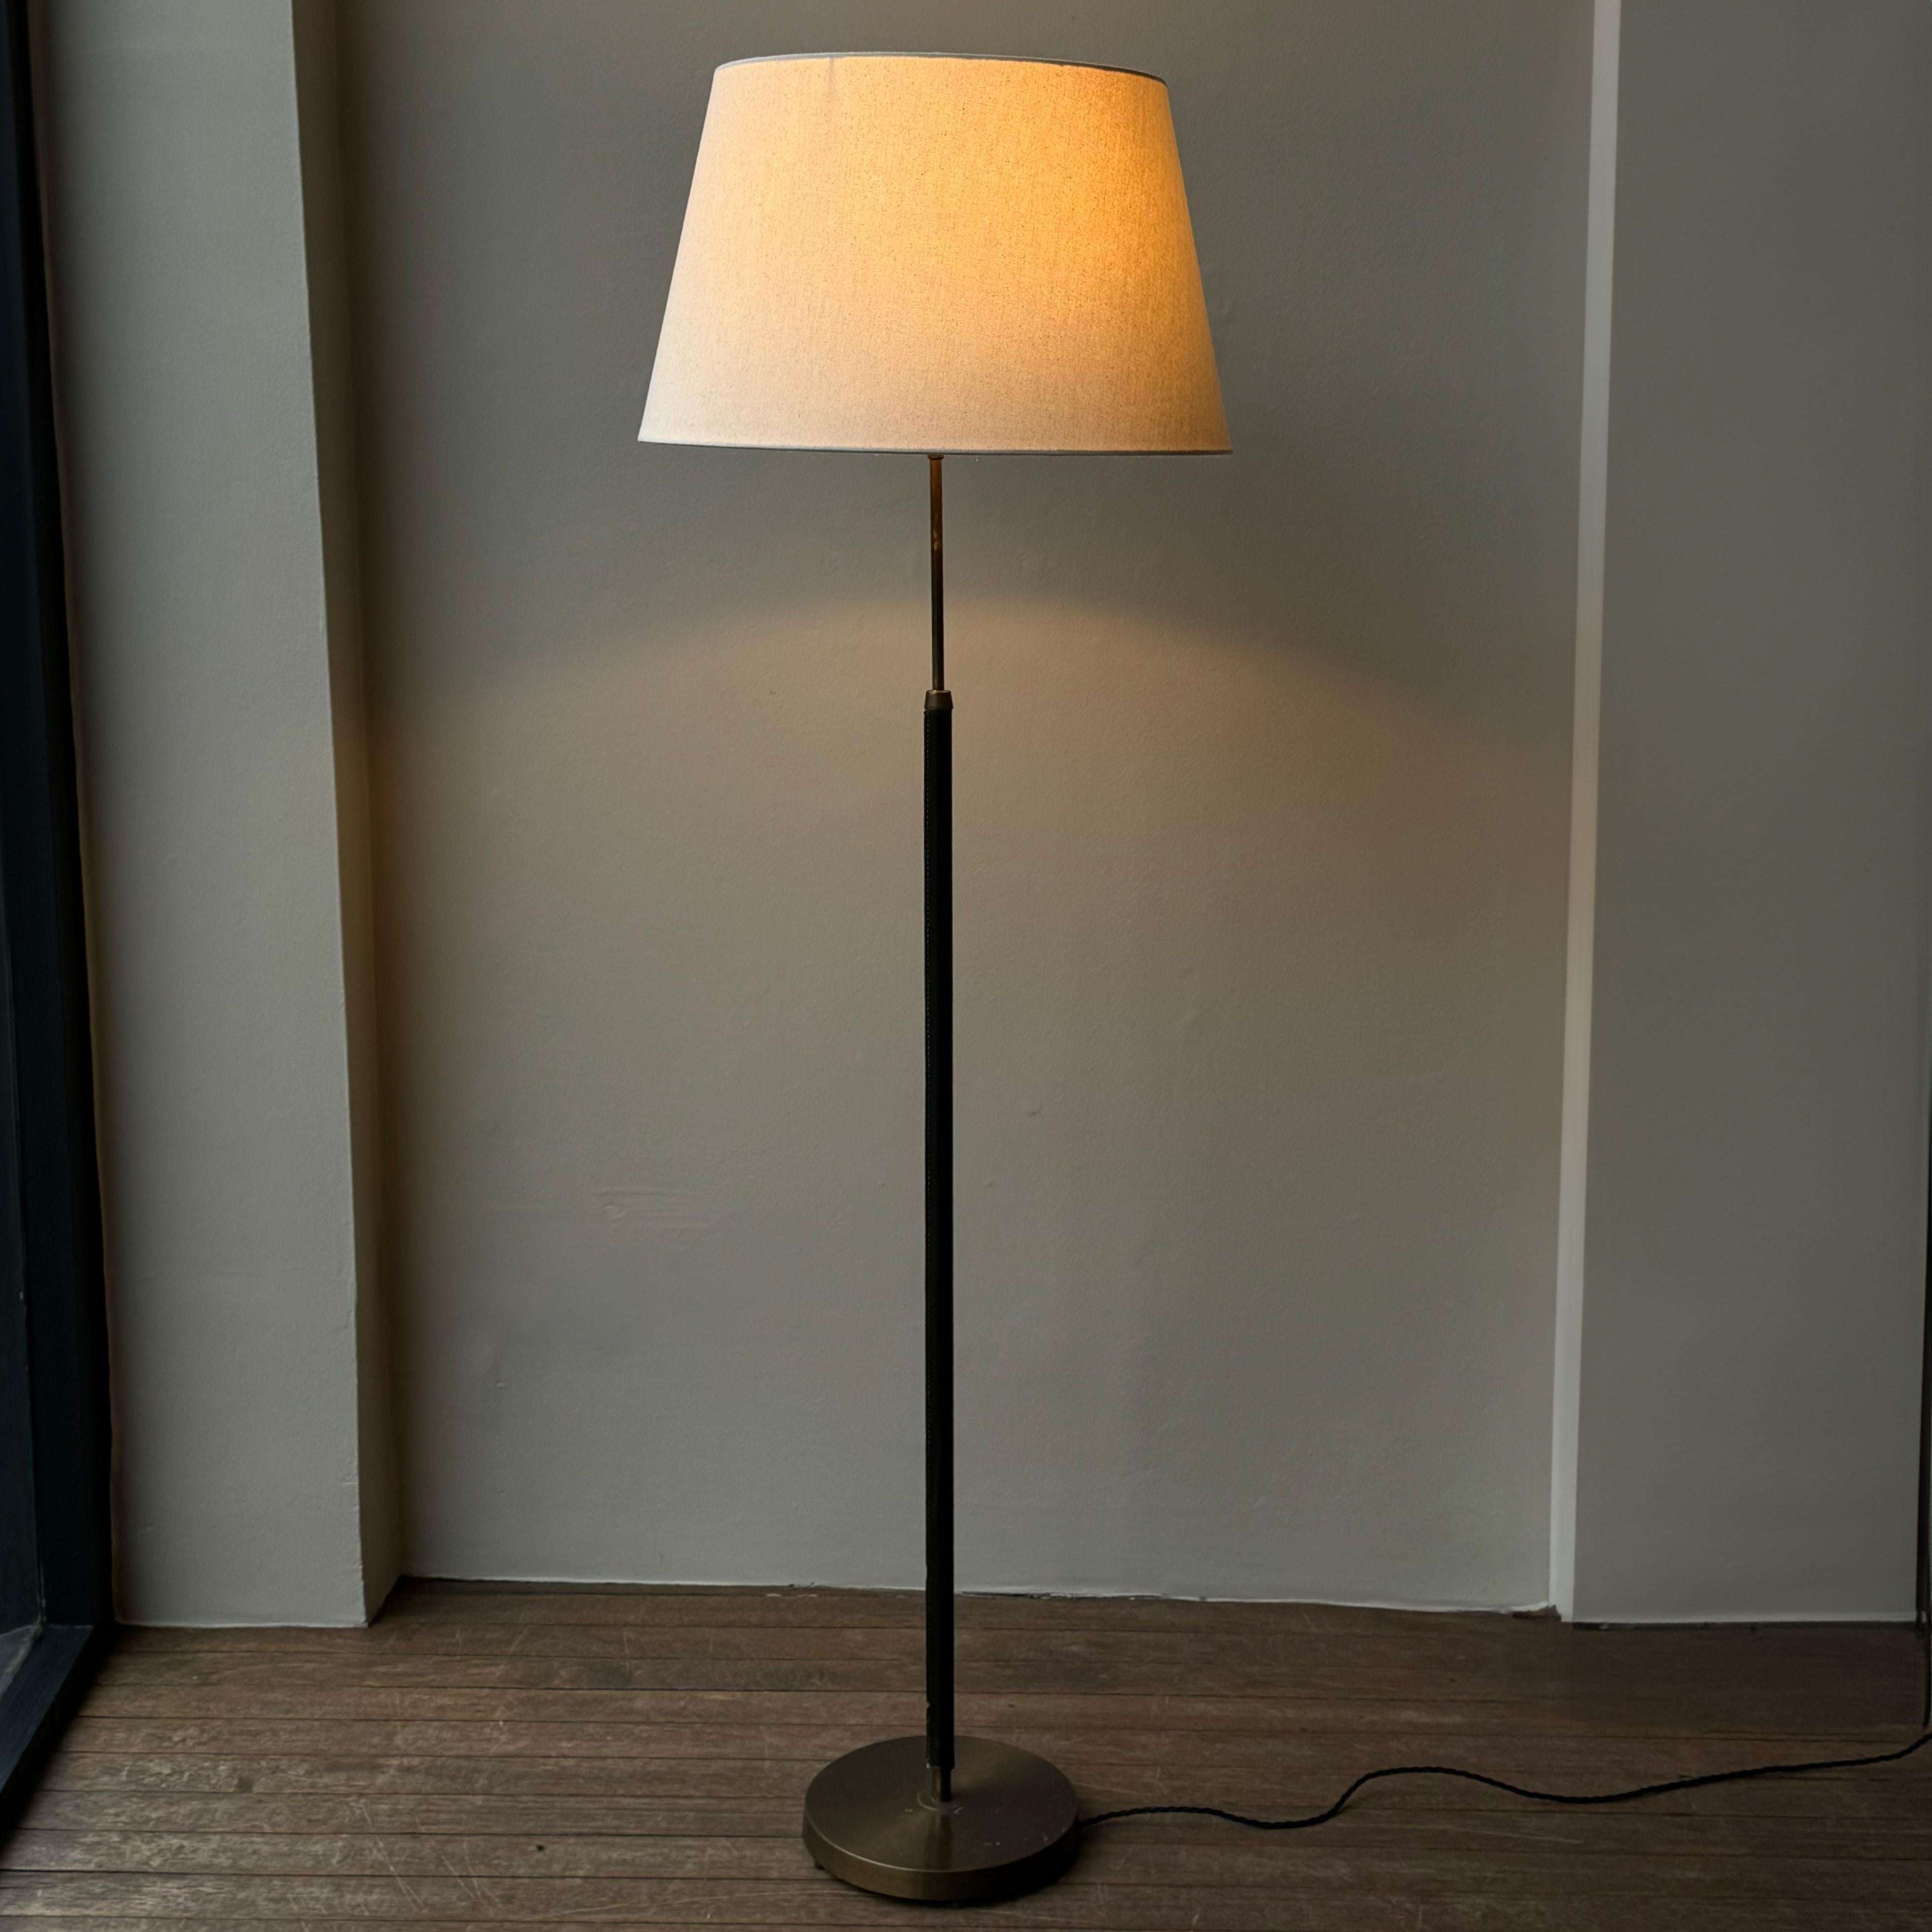 A petite leather bound brass floor lamp made in Sweden between 1950-1960 by Falkenbergs belysning. 

This beautifully proportioned and tactile floor lamp features a hand-stitched leather wrapped stem and evenly patinated base and upper stem. 

The